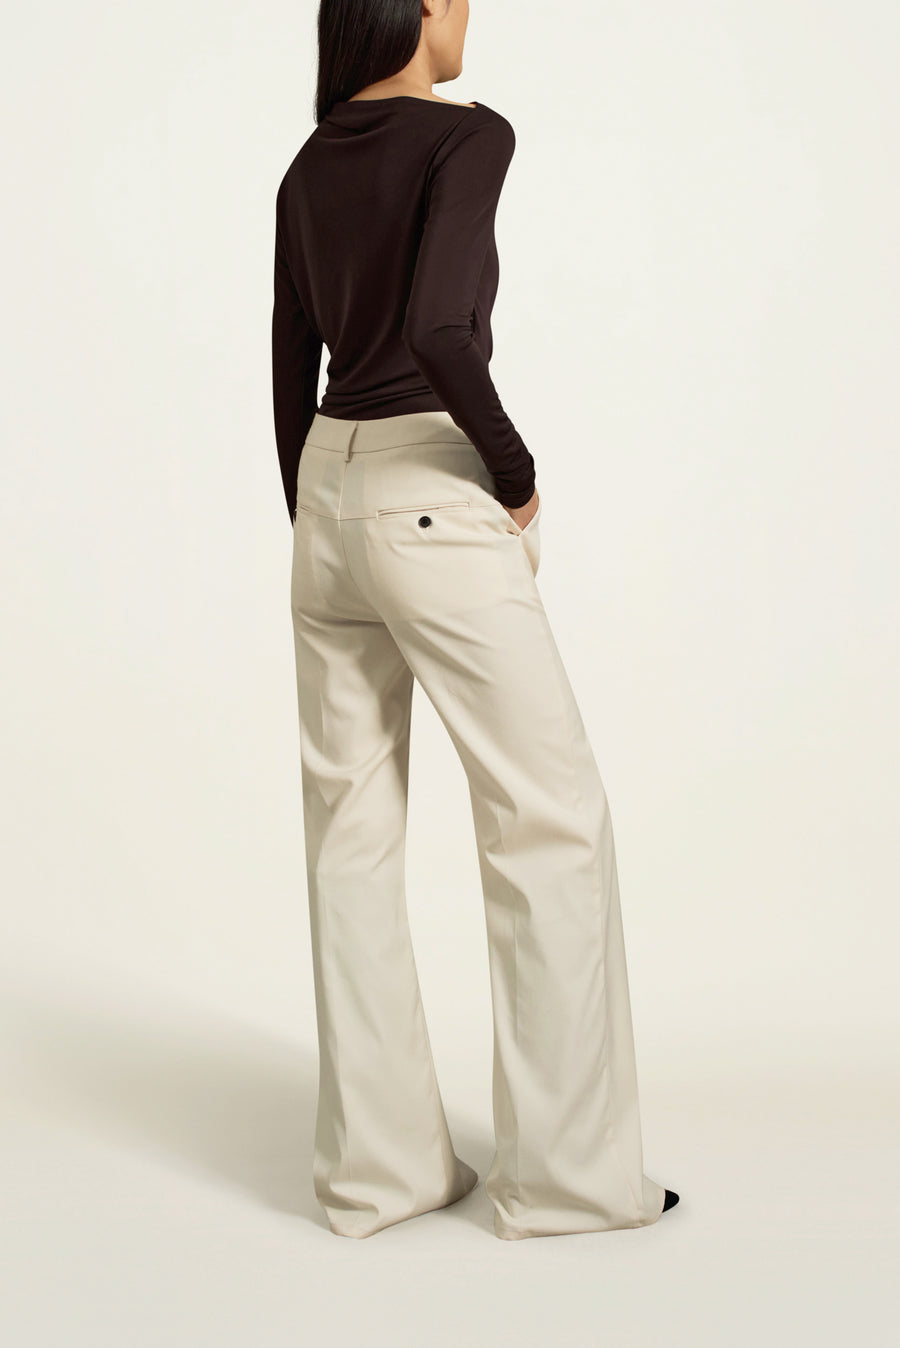 Athena Flare Pant in Ivory Tropical Wool